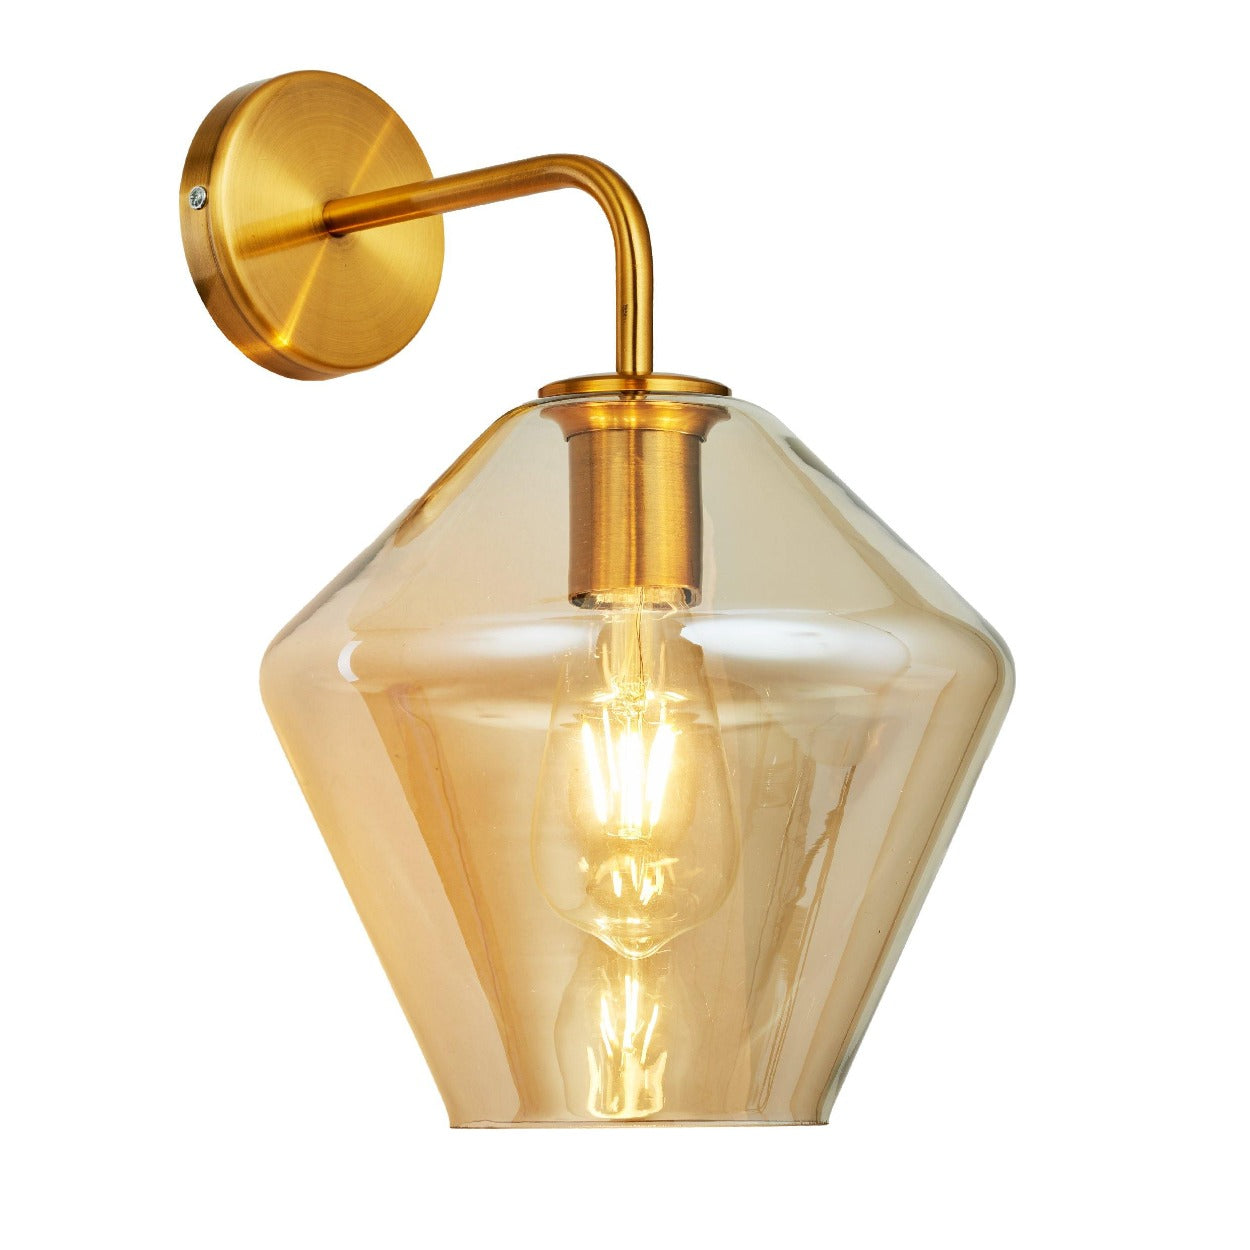 ANKUR PEAR WALL LIGHT WITH AMBER/COGNAC GLASS AND ANTIQUE BRASS FINISH - Ankur Lighting